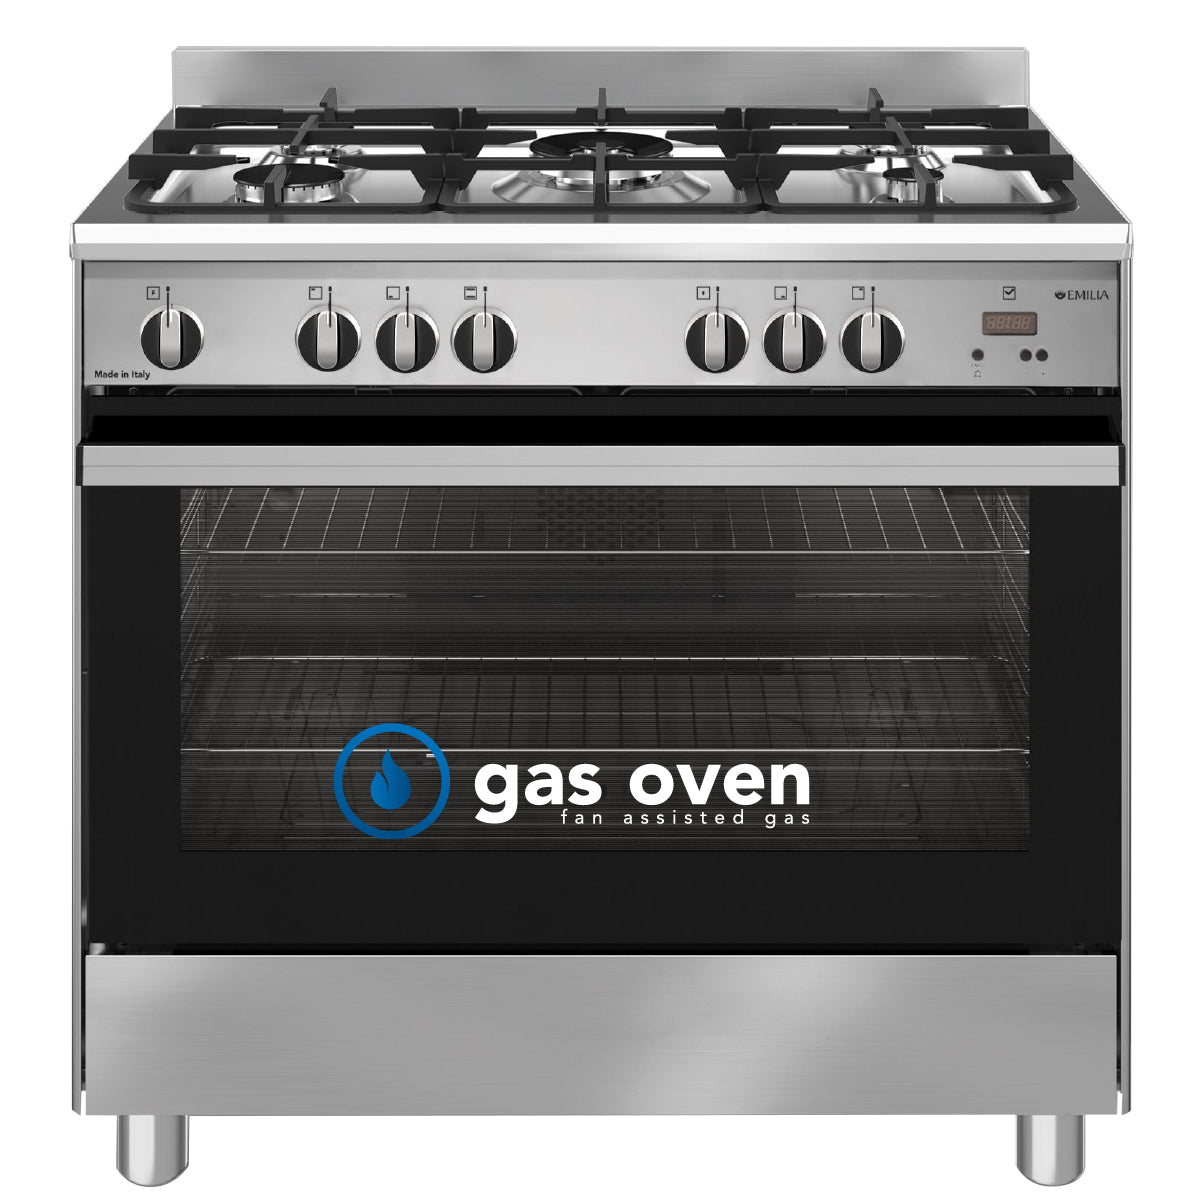 Emilia 90cm cooker with fan assisted gas oven